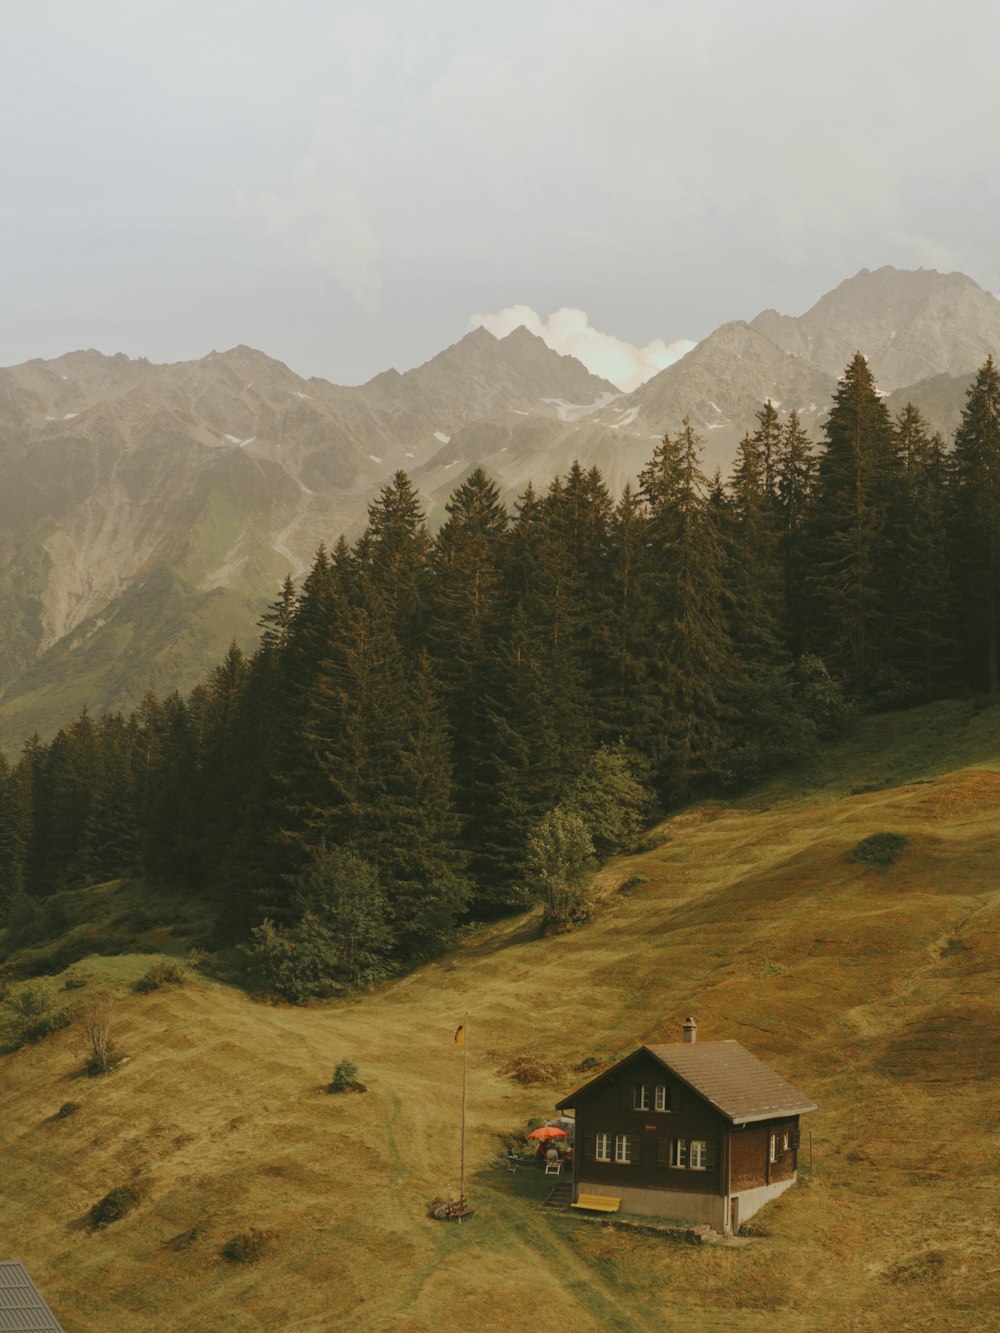 brown wooden house near green trees and mountains during daytime